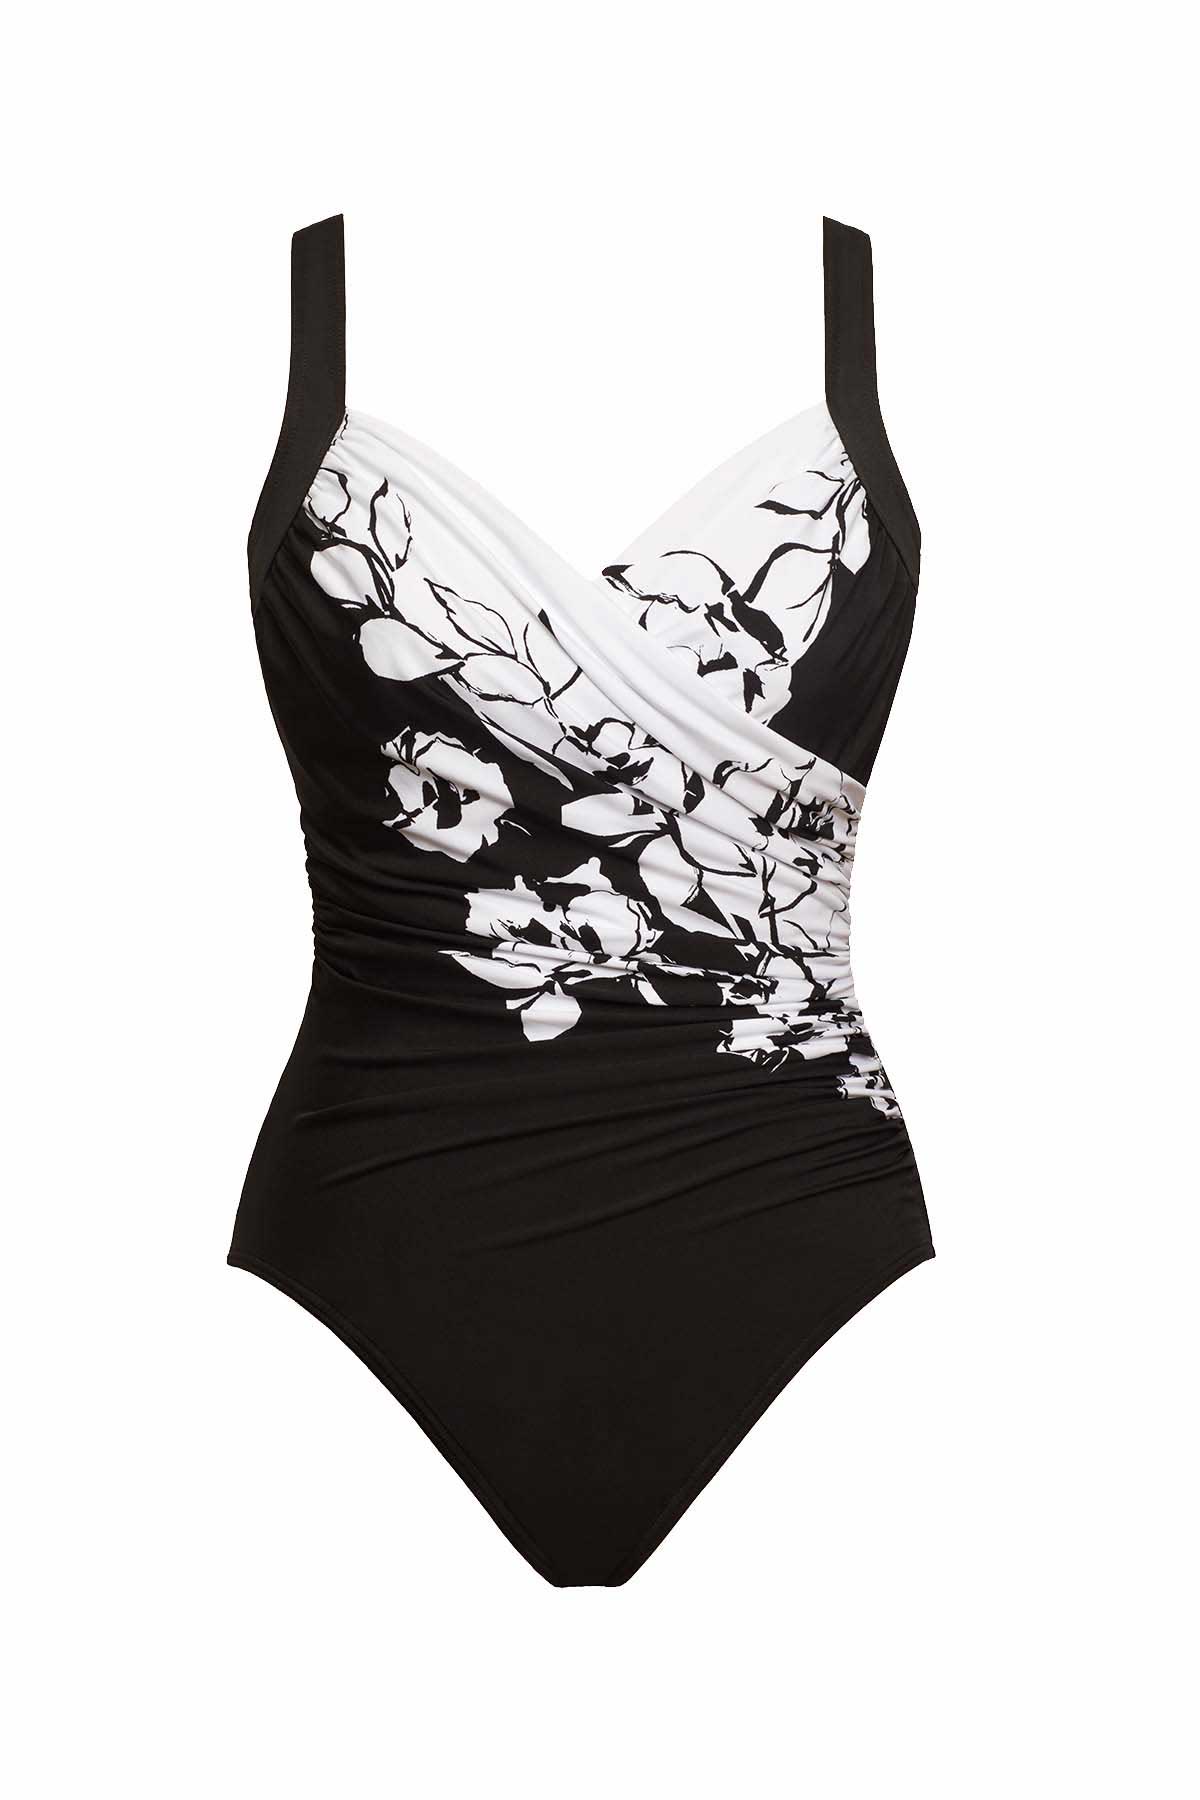 Miraclesuit Sub Rosa Sanibel One Piece Swimsuit DD-Cup